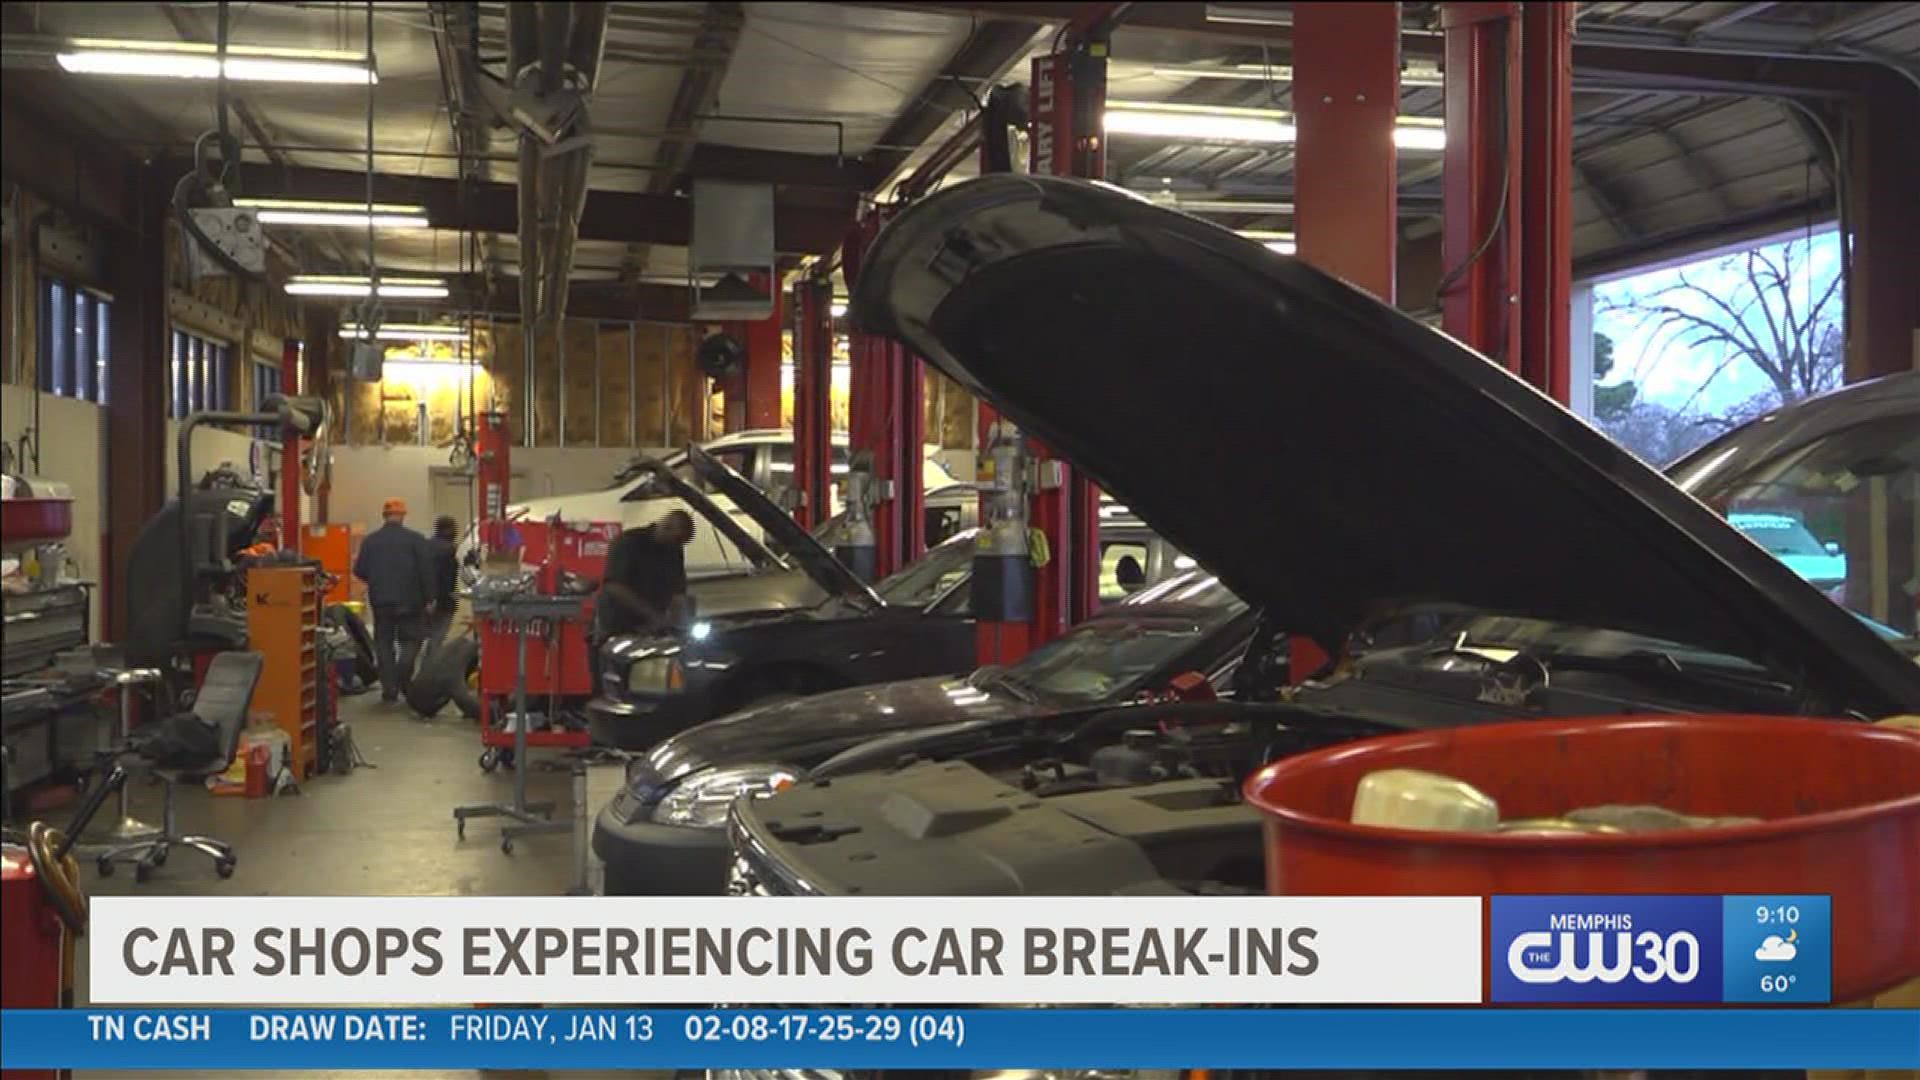 Auto shops are getting hit hard by car thefts, and one in particular is asking customers not leave their vehicles outside of the shop if they don't have to.